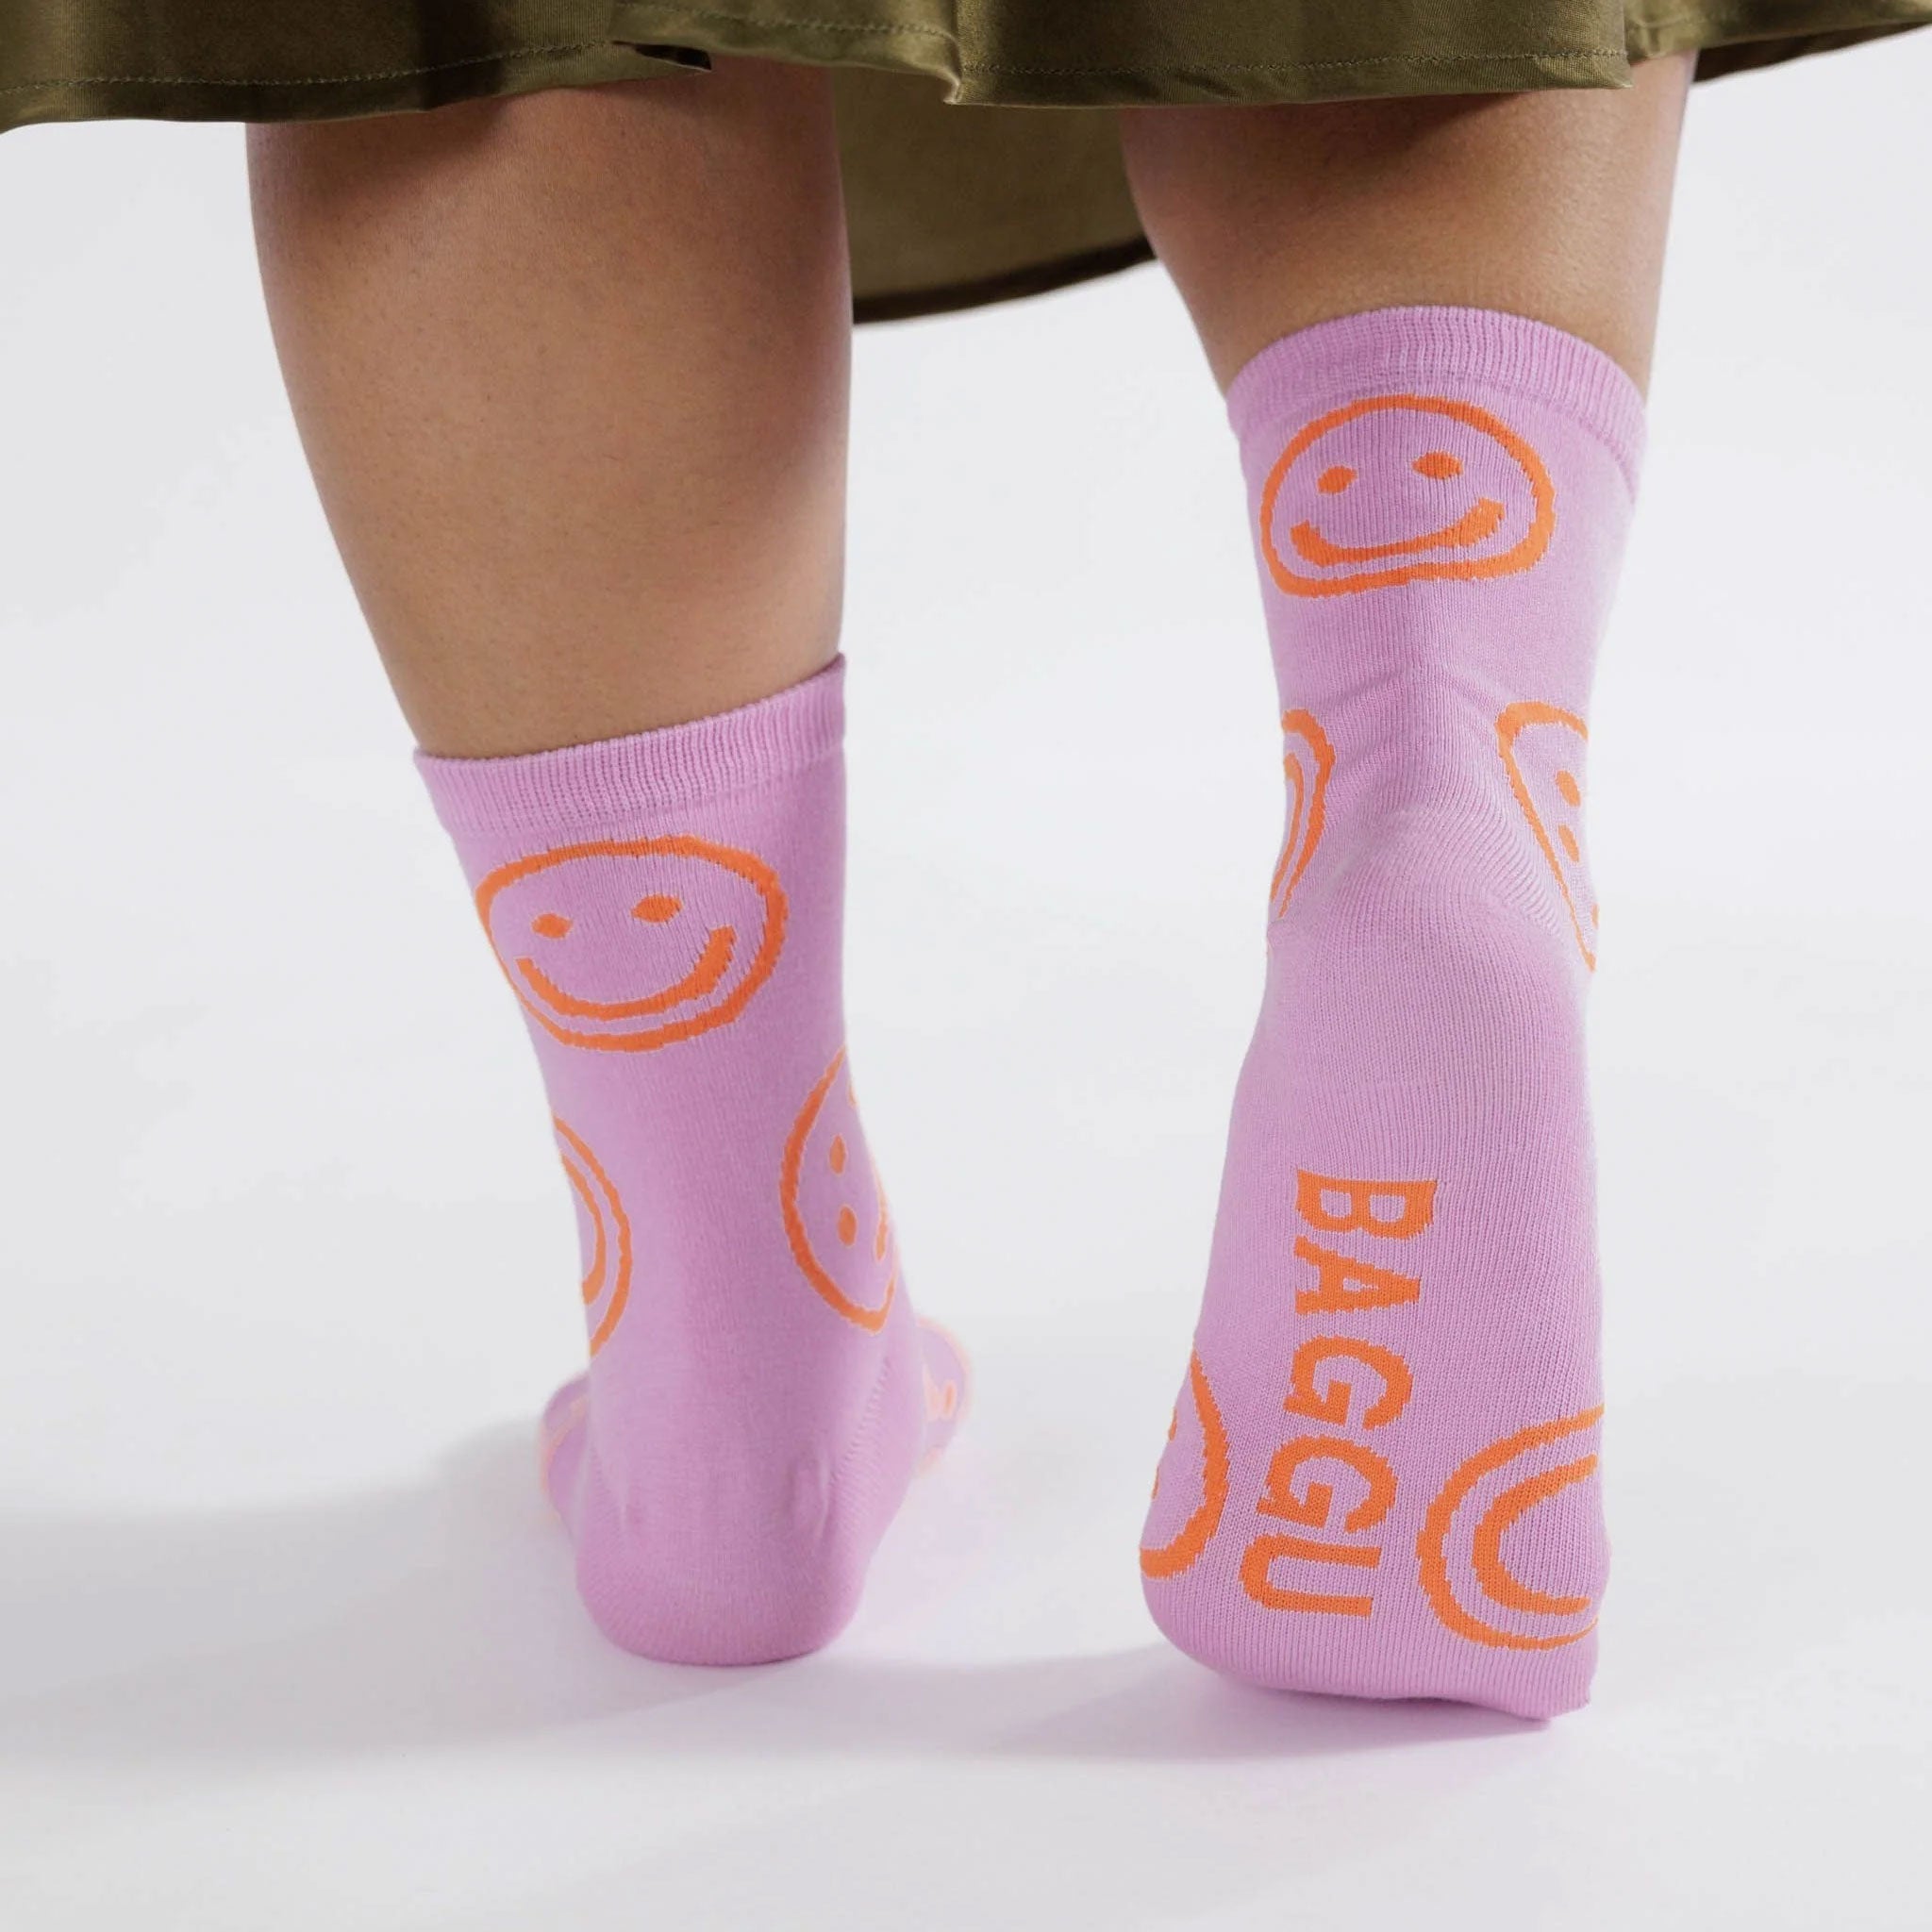 pink socks with orange smiley faces worn on a woman's feet